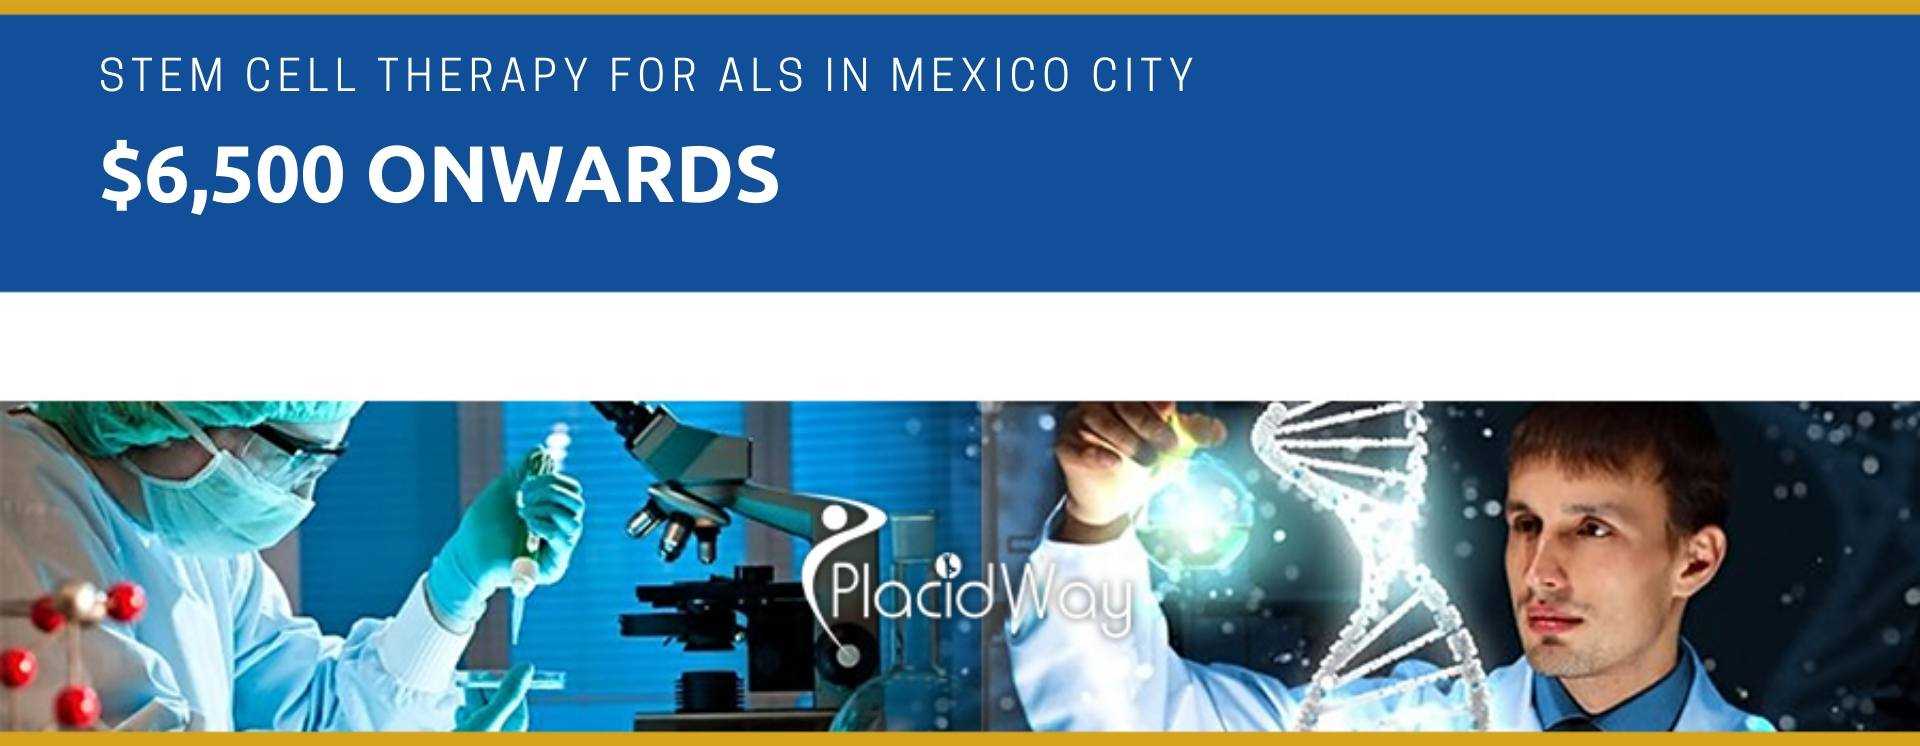 Stem Cell Therapy for ALS in Mexico City